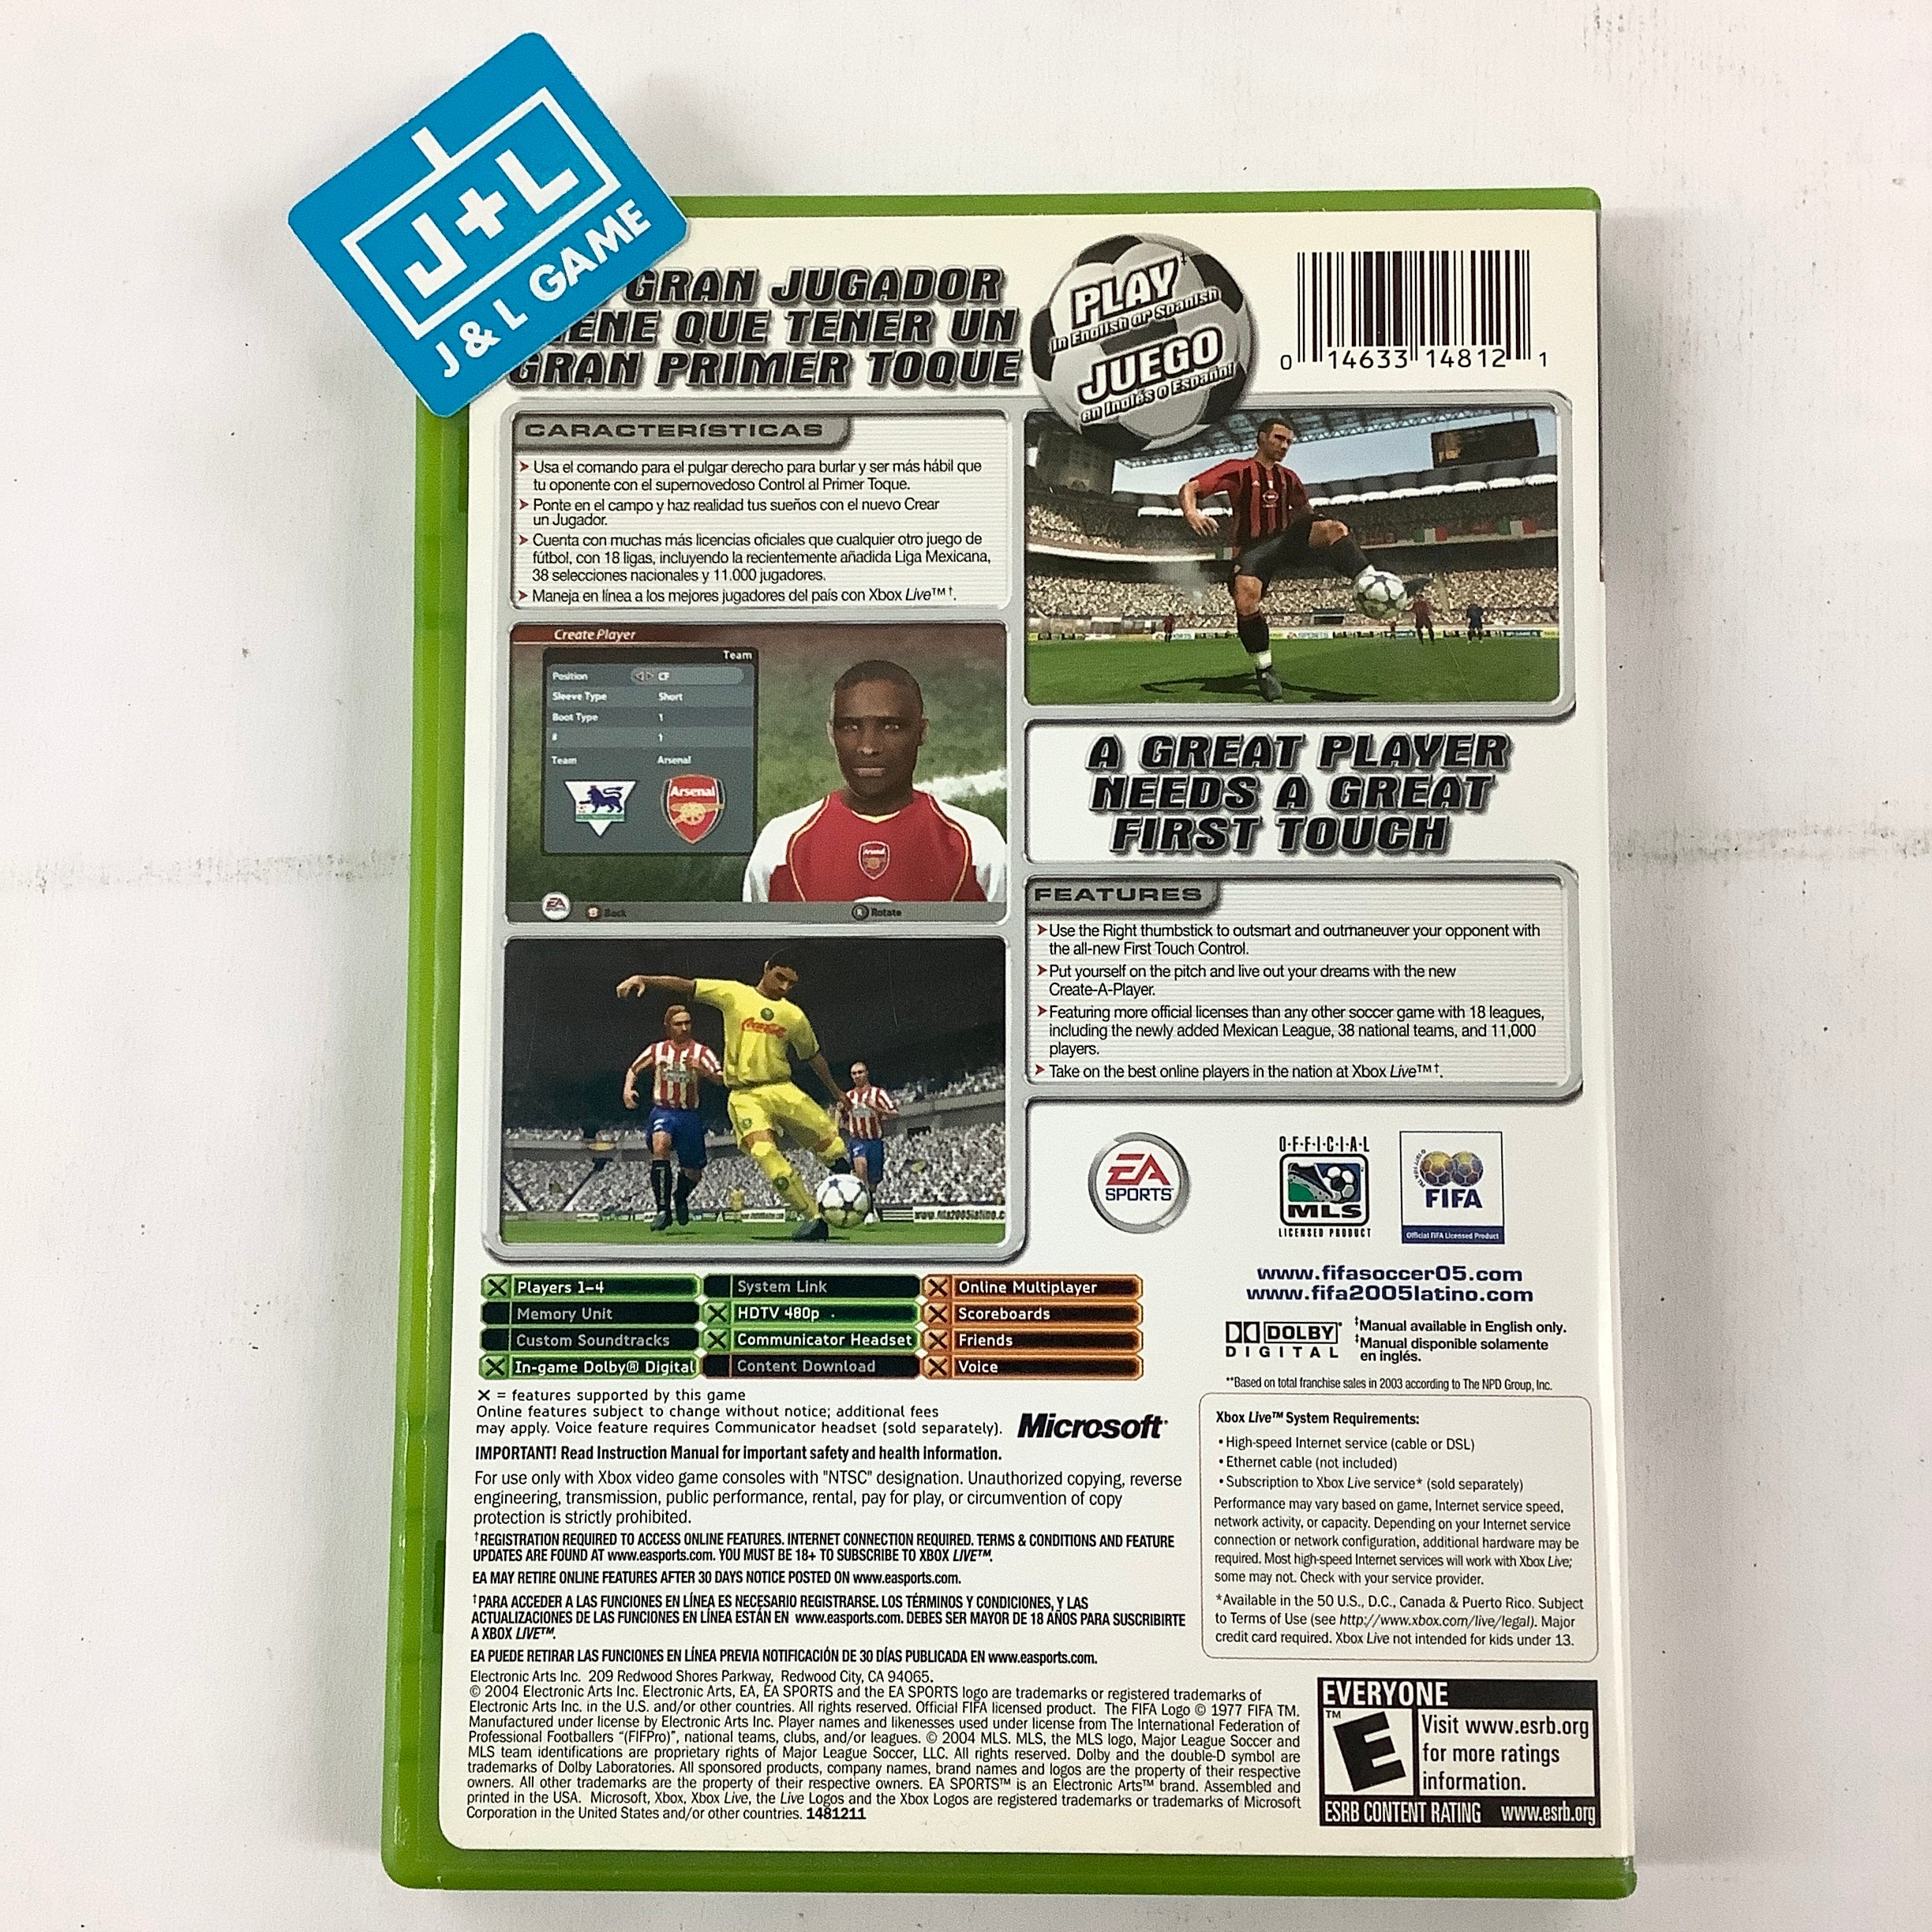 FIFA Soccer 2005 - (XB) Xbox [Pre-Owned] Video Games EA Sports   